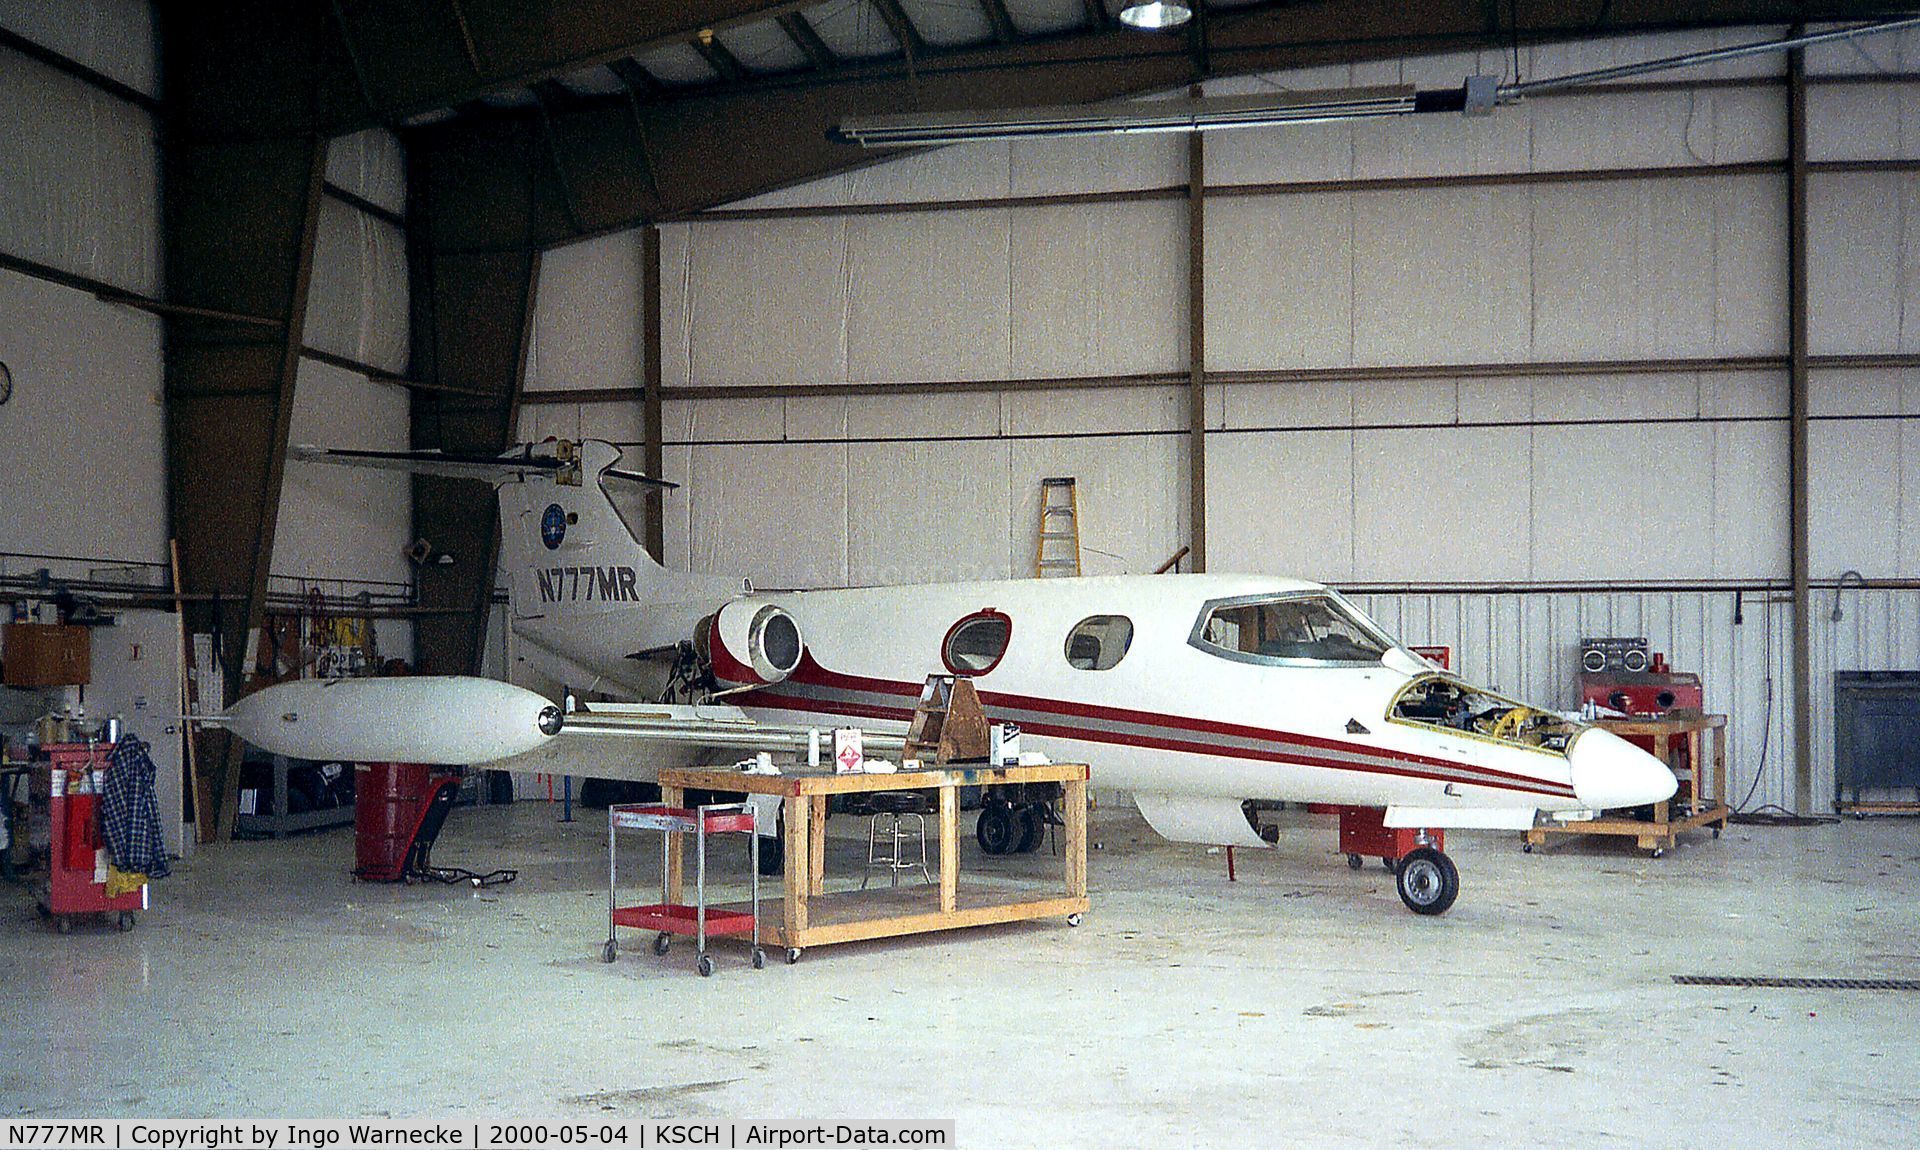 N777MR, 1967 Learjet 24 C/N 24-142, Learjet 24 undergoing maintenance (engine change?) at Schenectady county airport